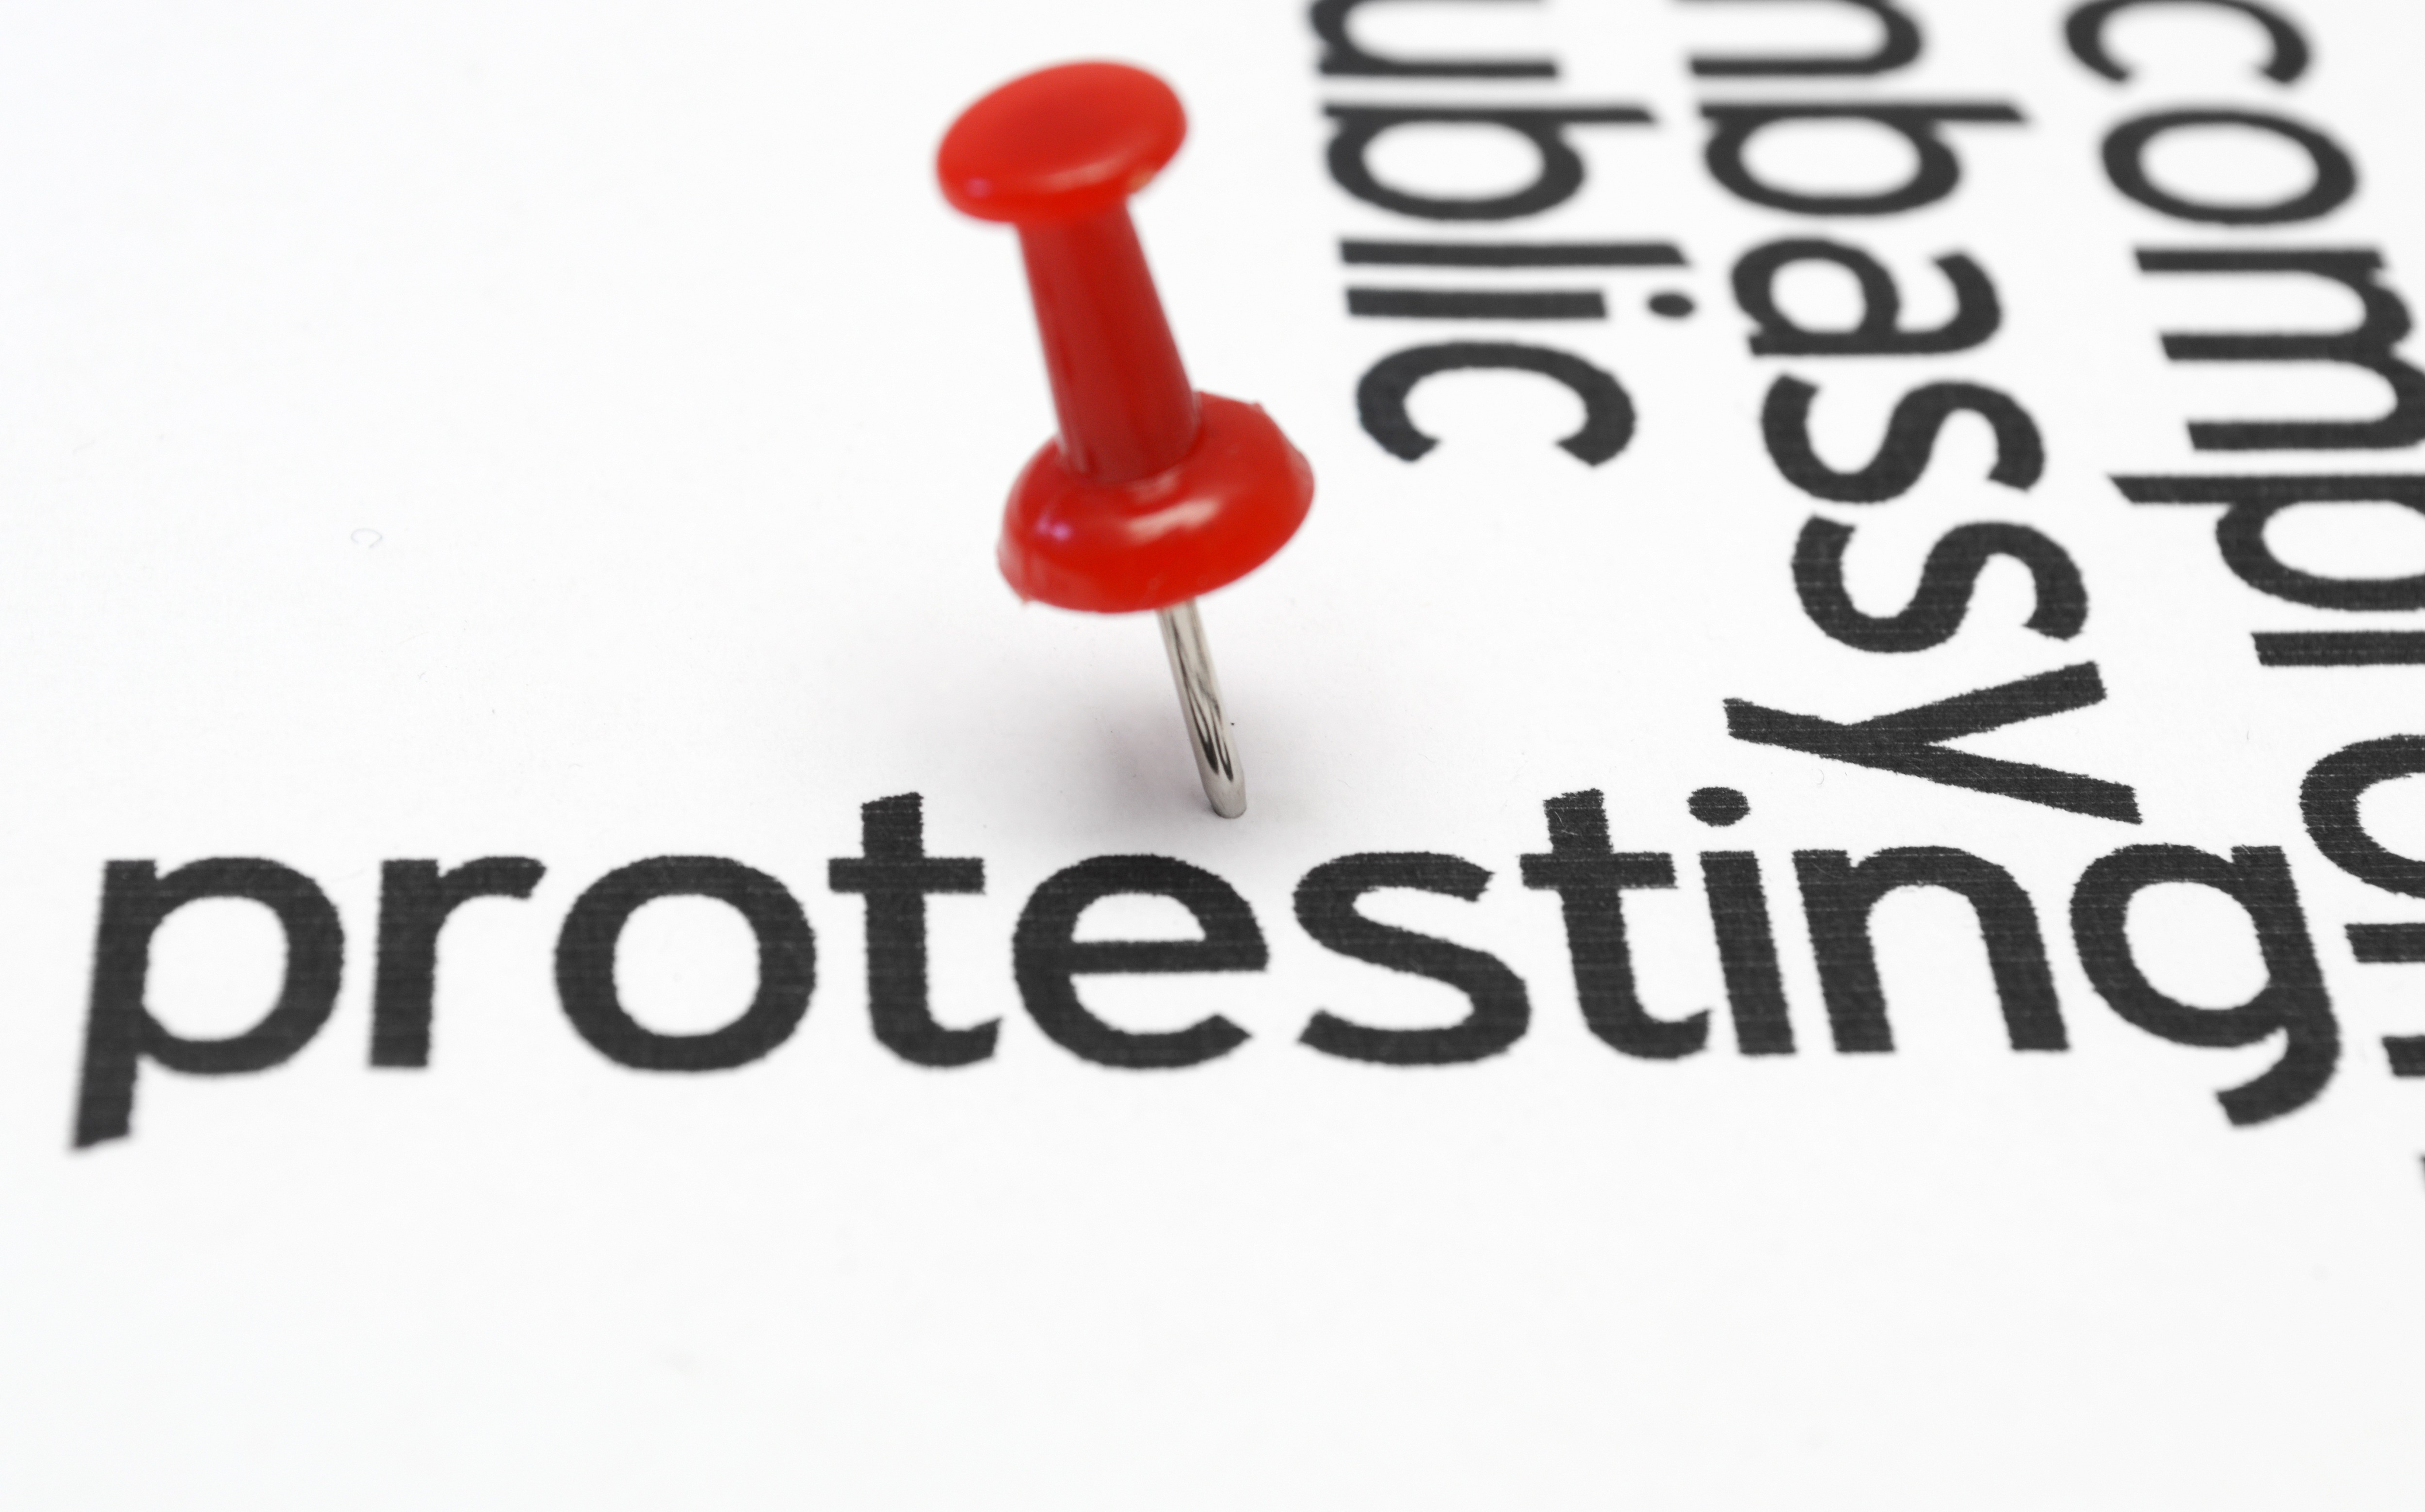 Protesting concept with a tack near the word "protest" on a sheet of paper